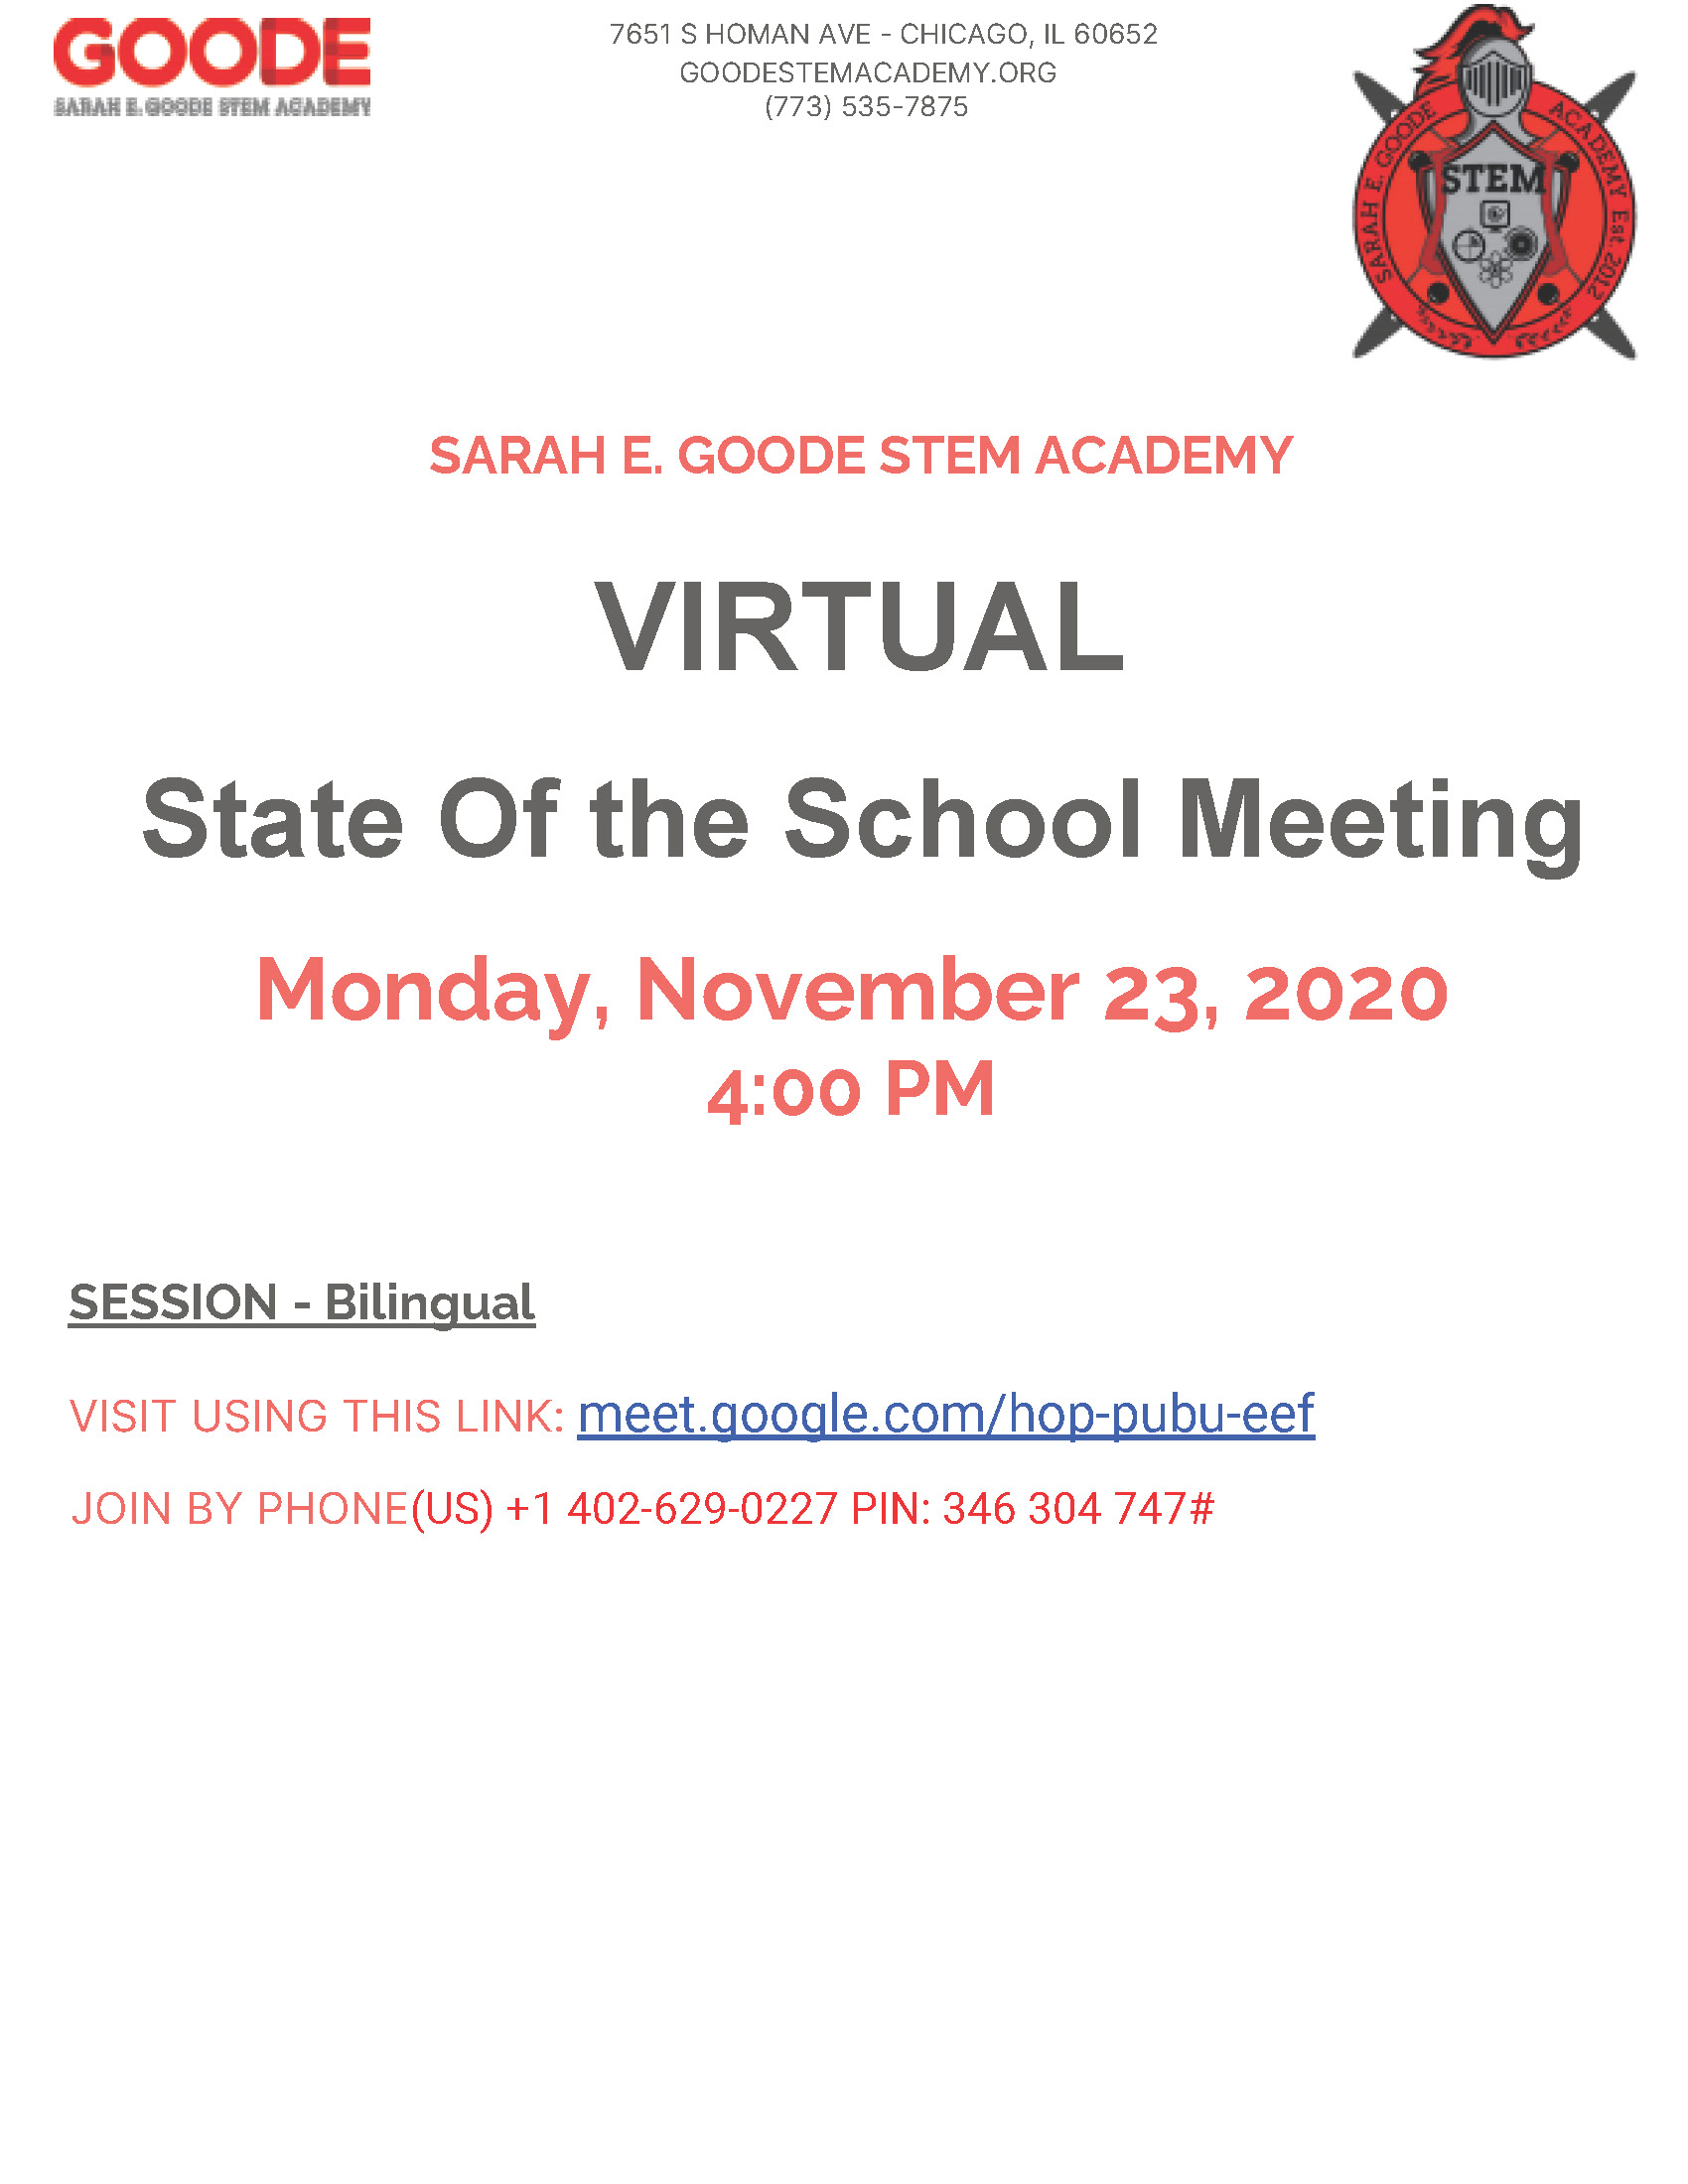 Virtual State Of the School Meeting